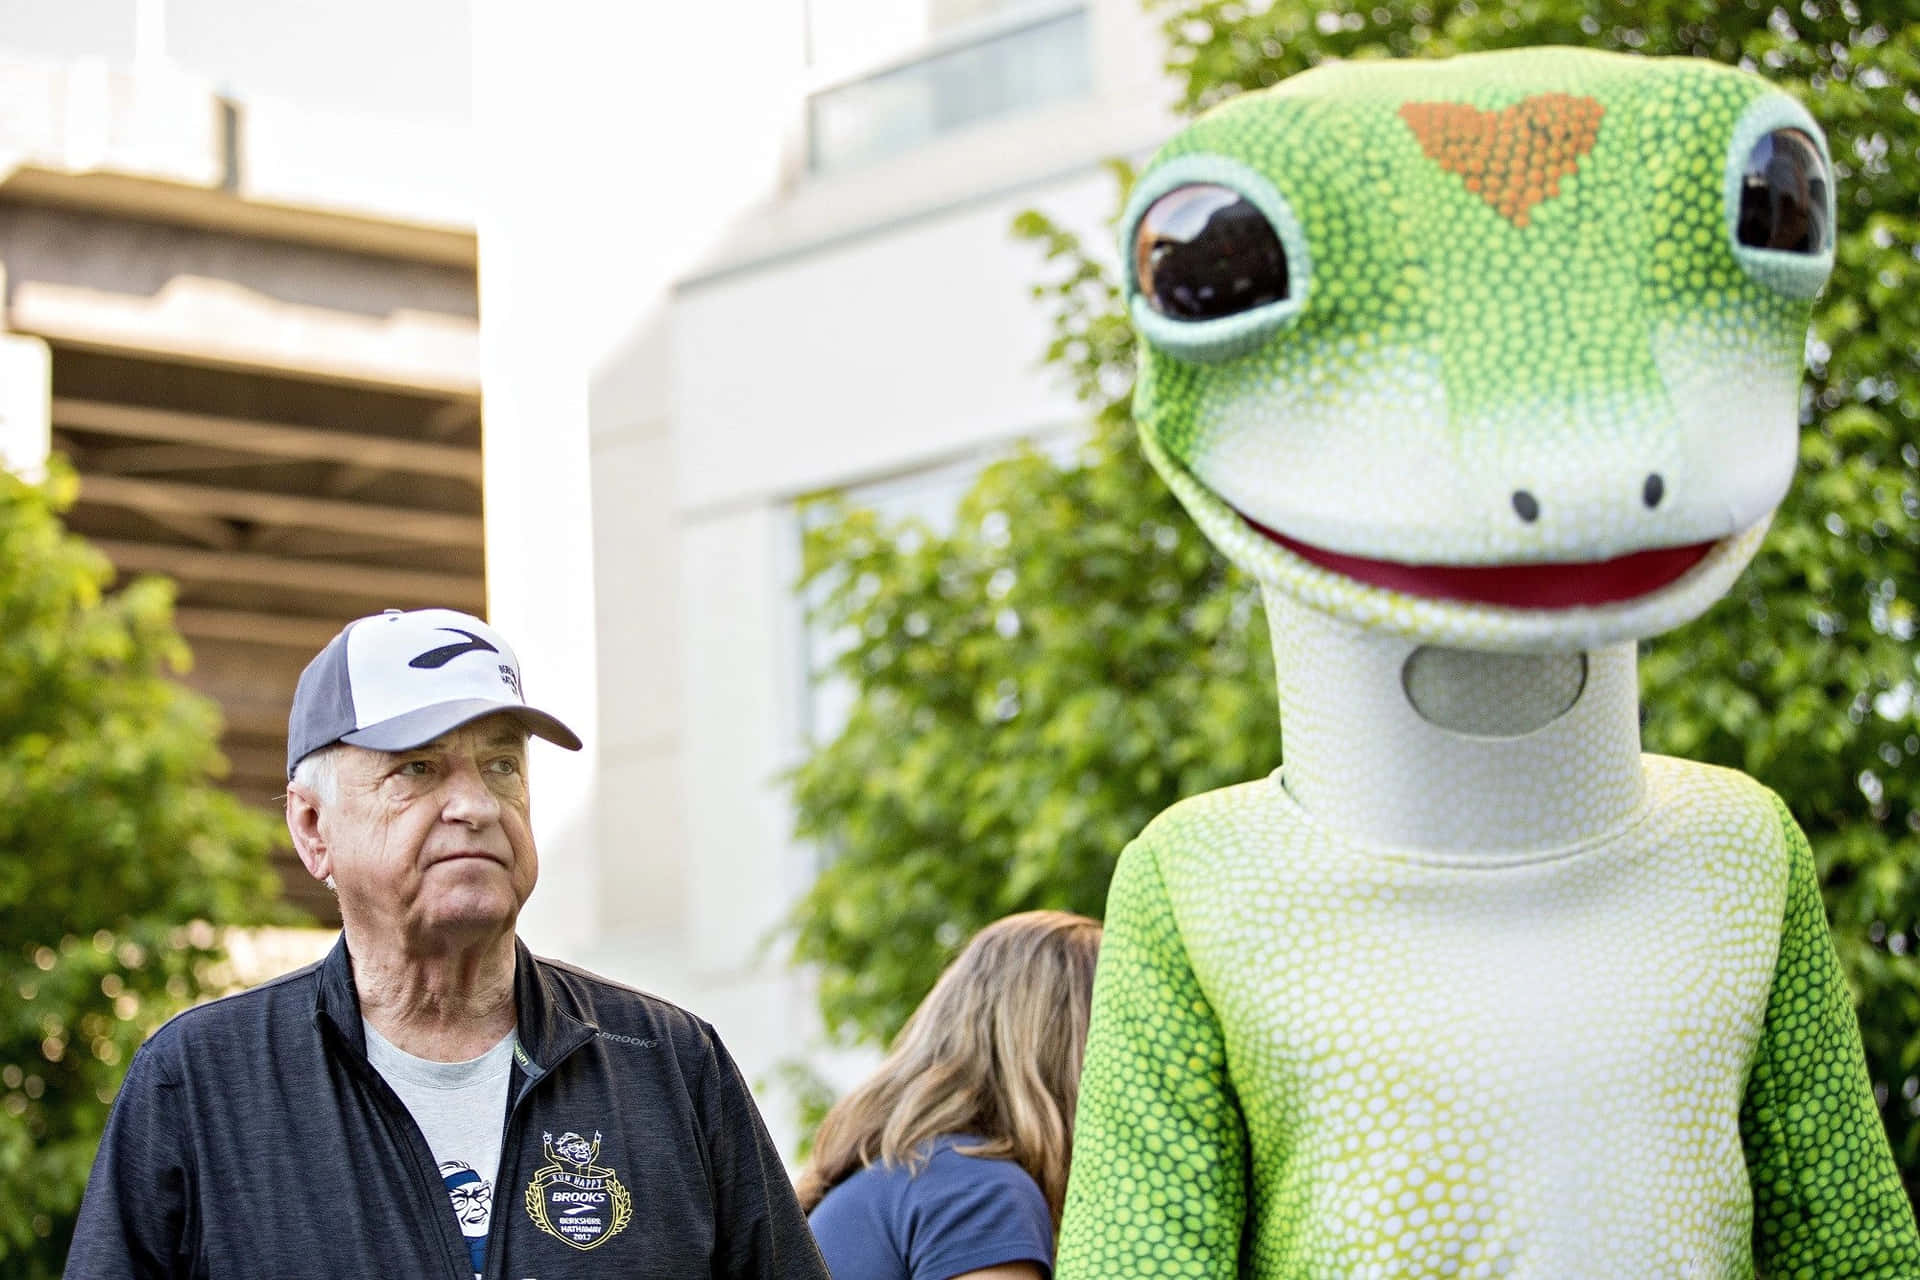 Caption: Geico Insurance Mascot in Natural Setting